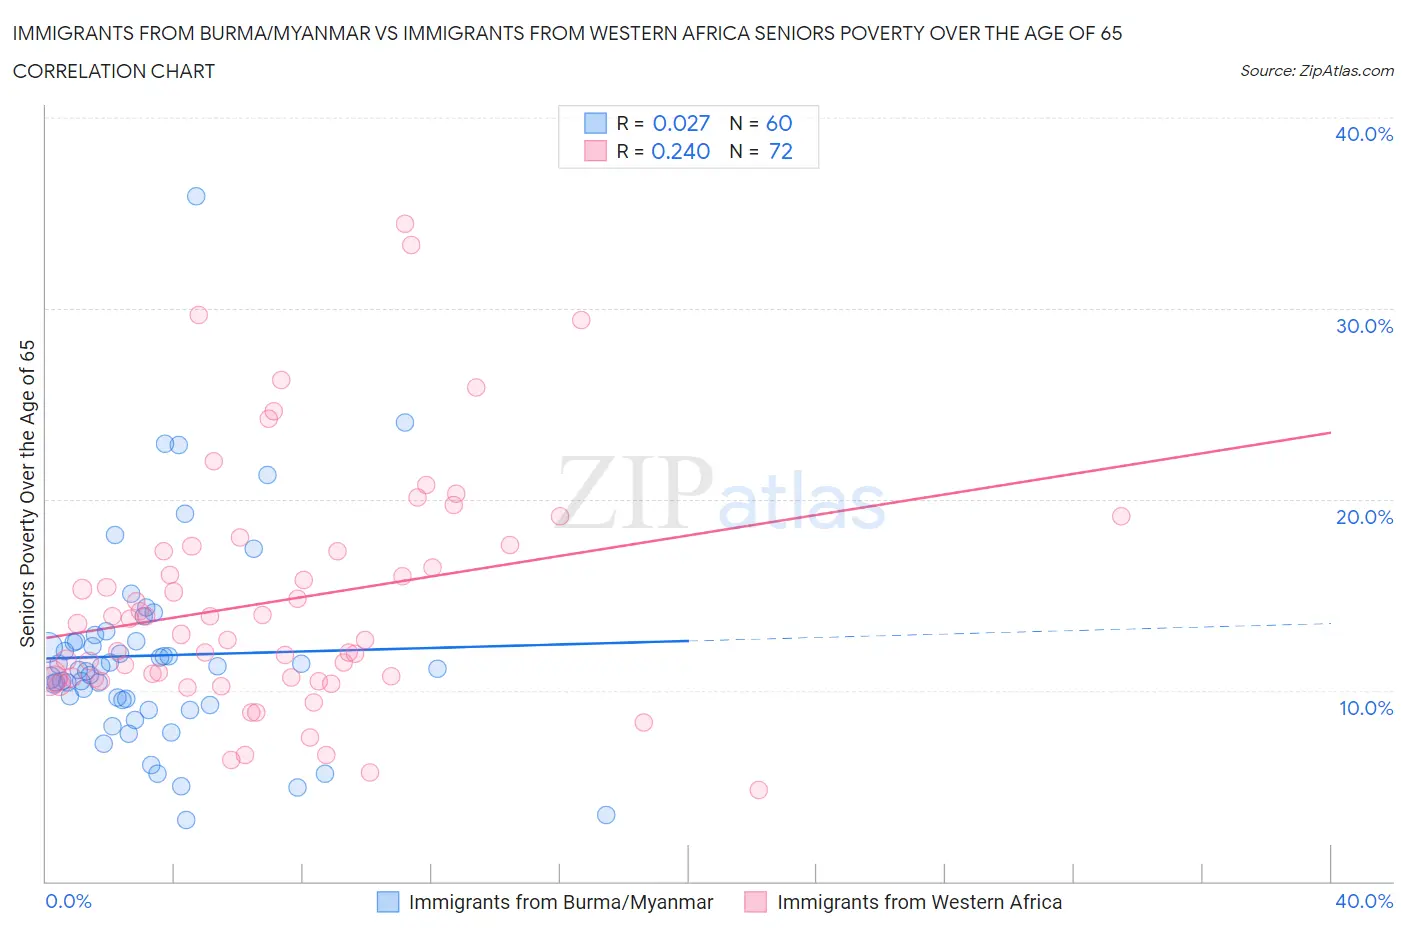 Immigrants from Burma/Myanmar vs Immigrants from Western Africa Seniors Poverty Over the Age of 65